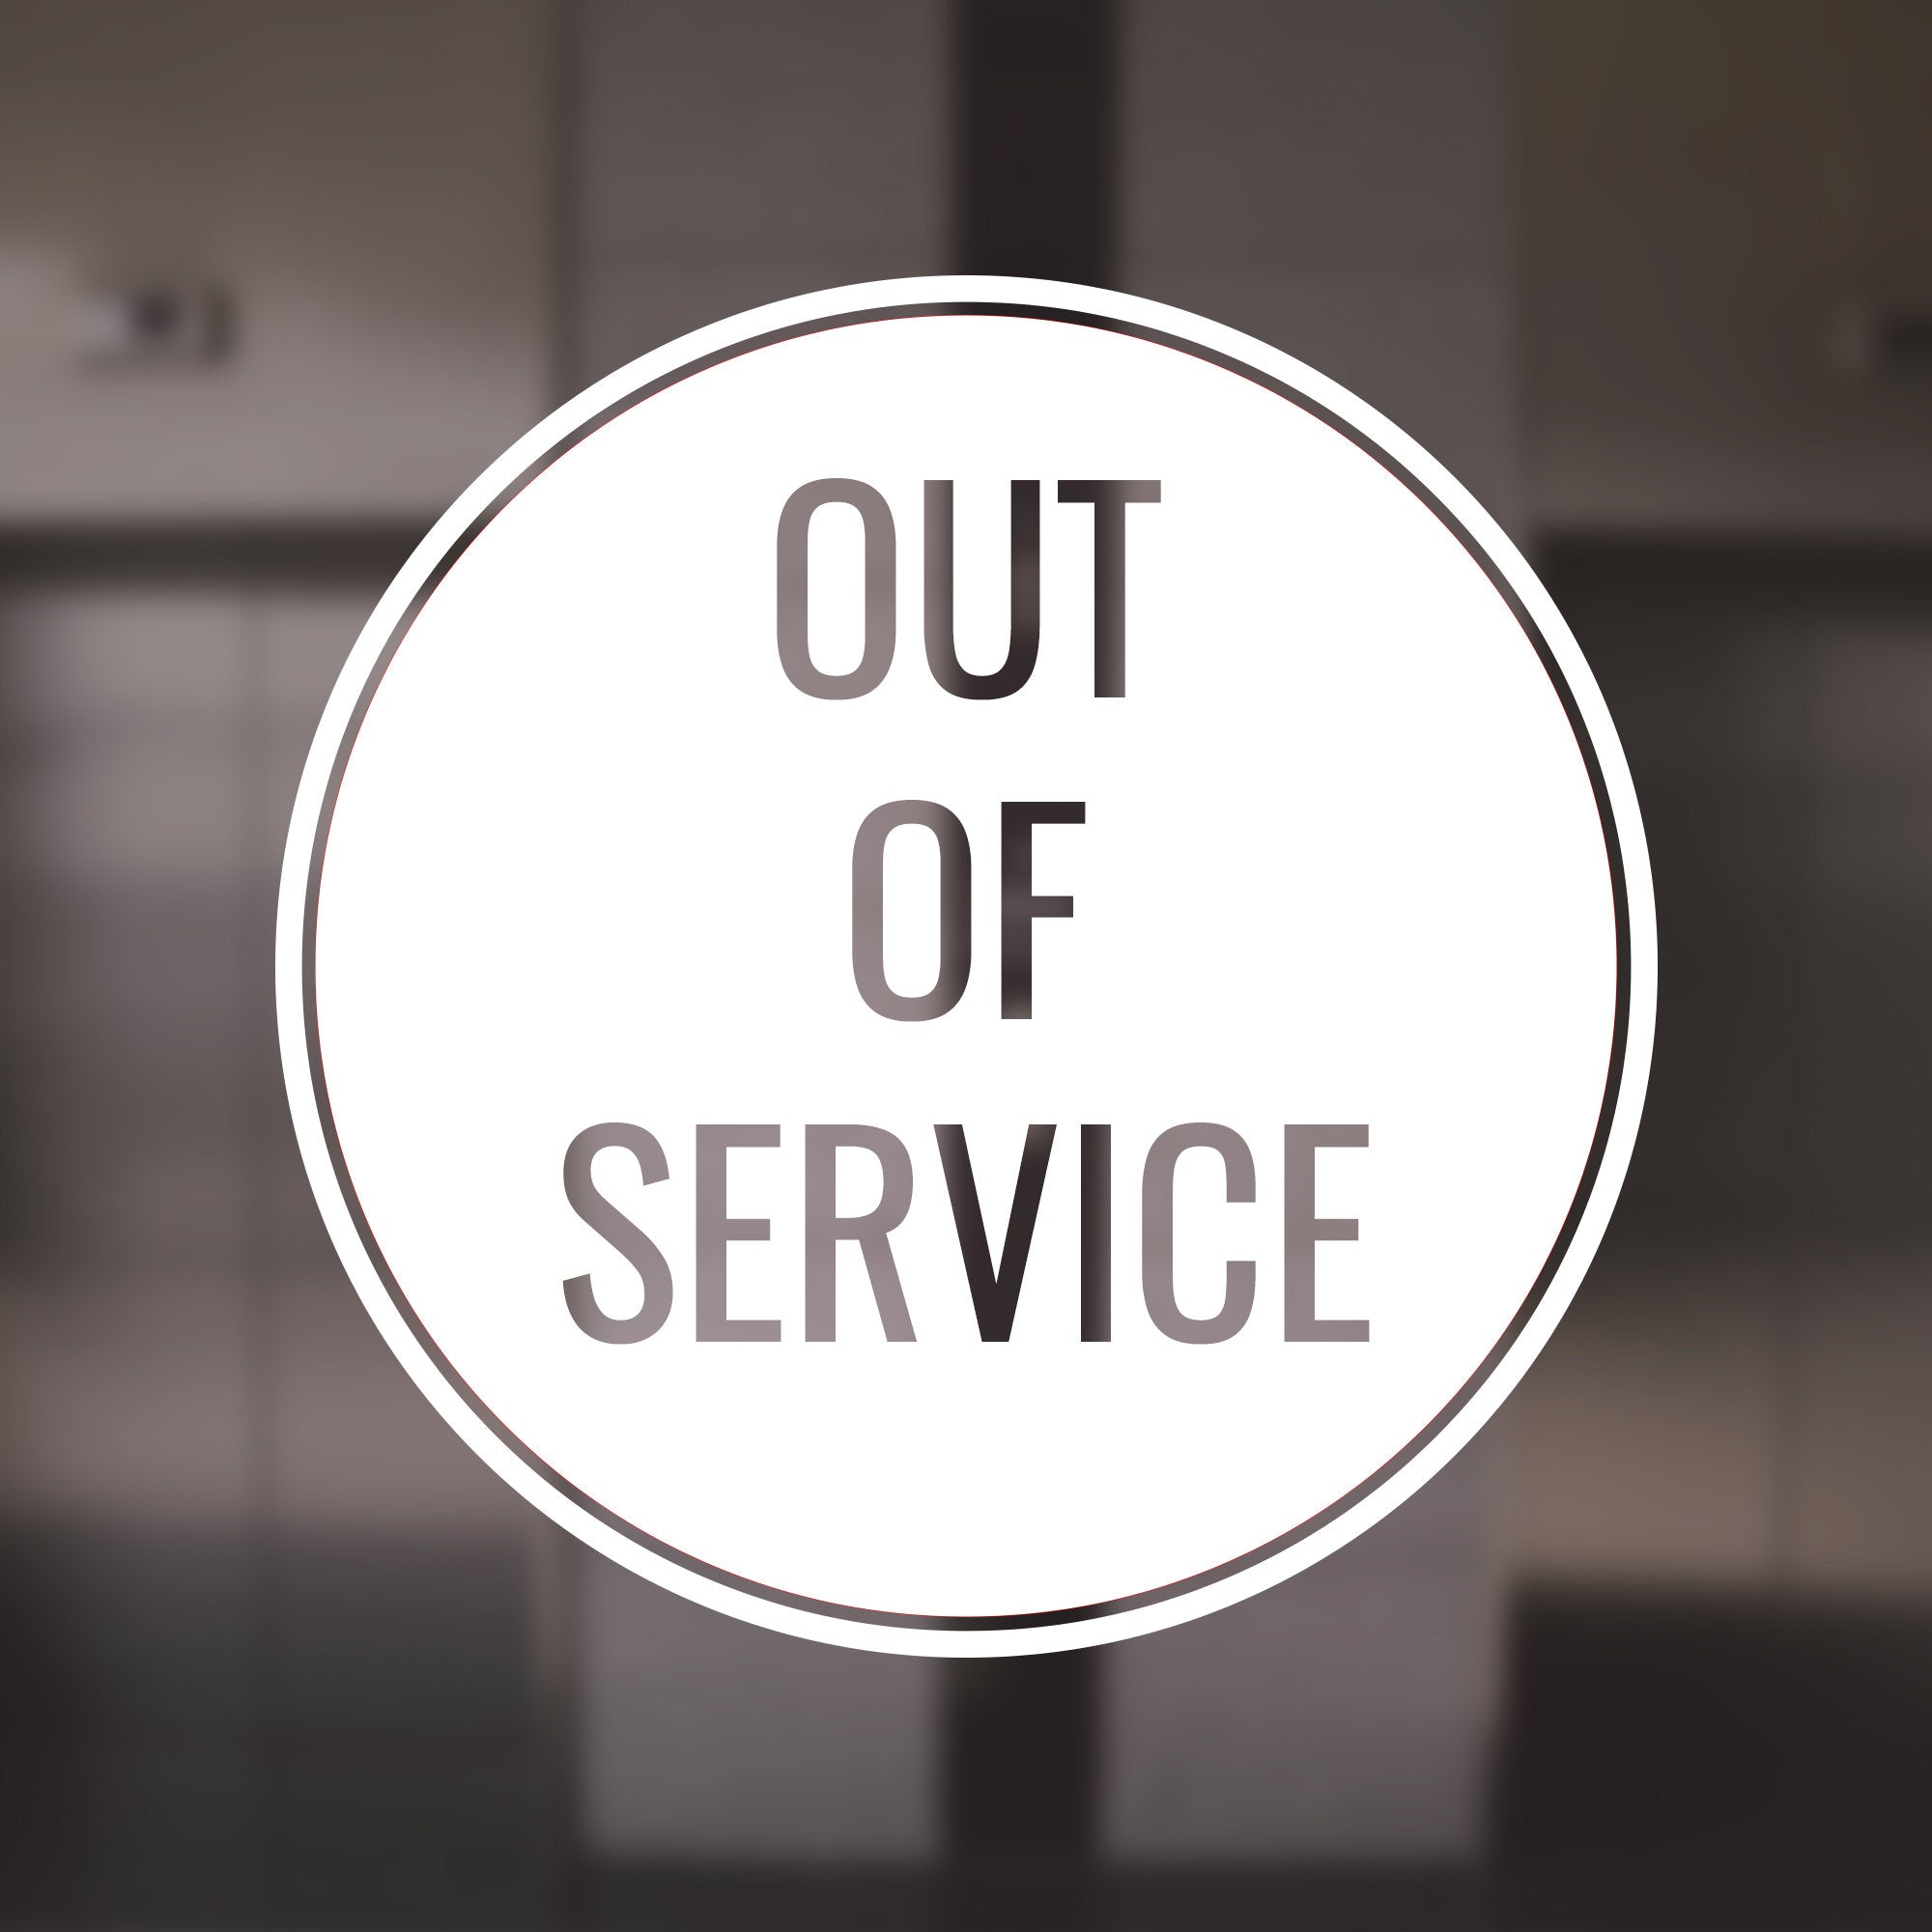 Out of Service Vinyl Decal for Walls, Windows, Doors in Businesses, Stores, Shops, Restaurants, and More!